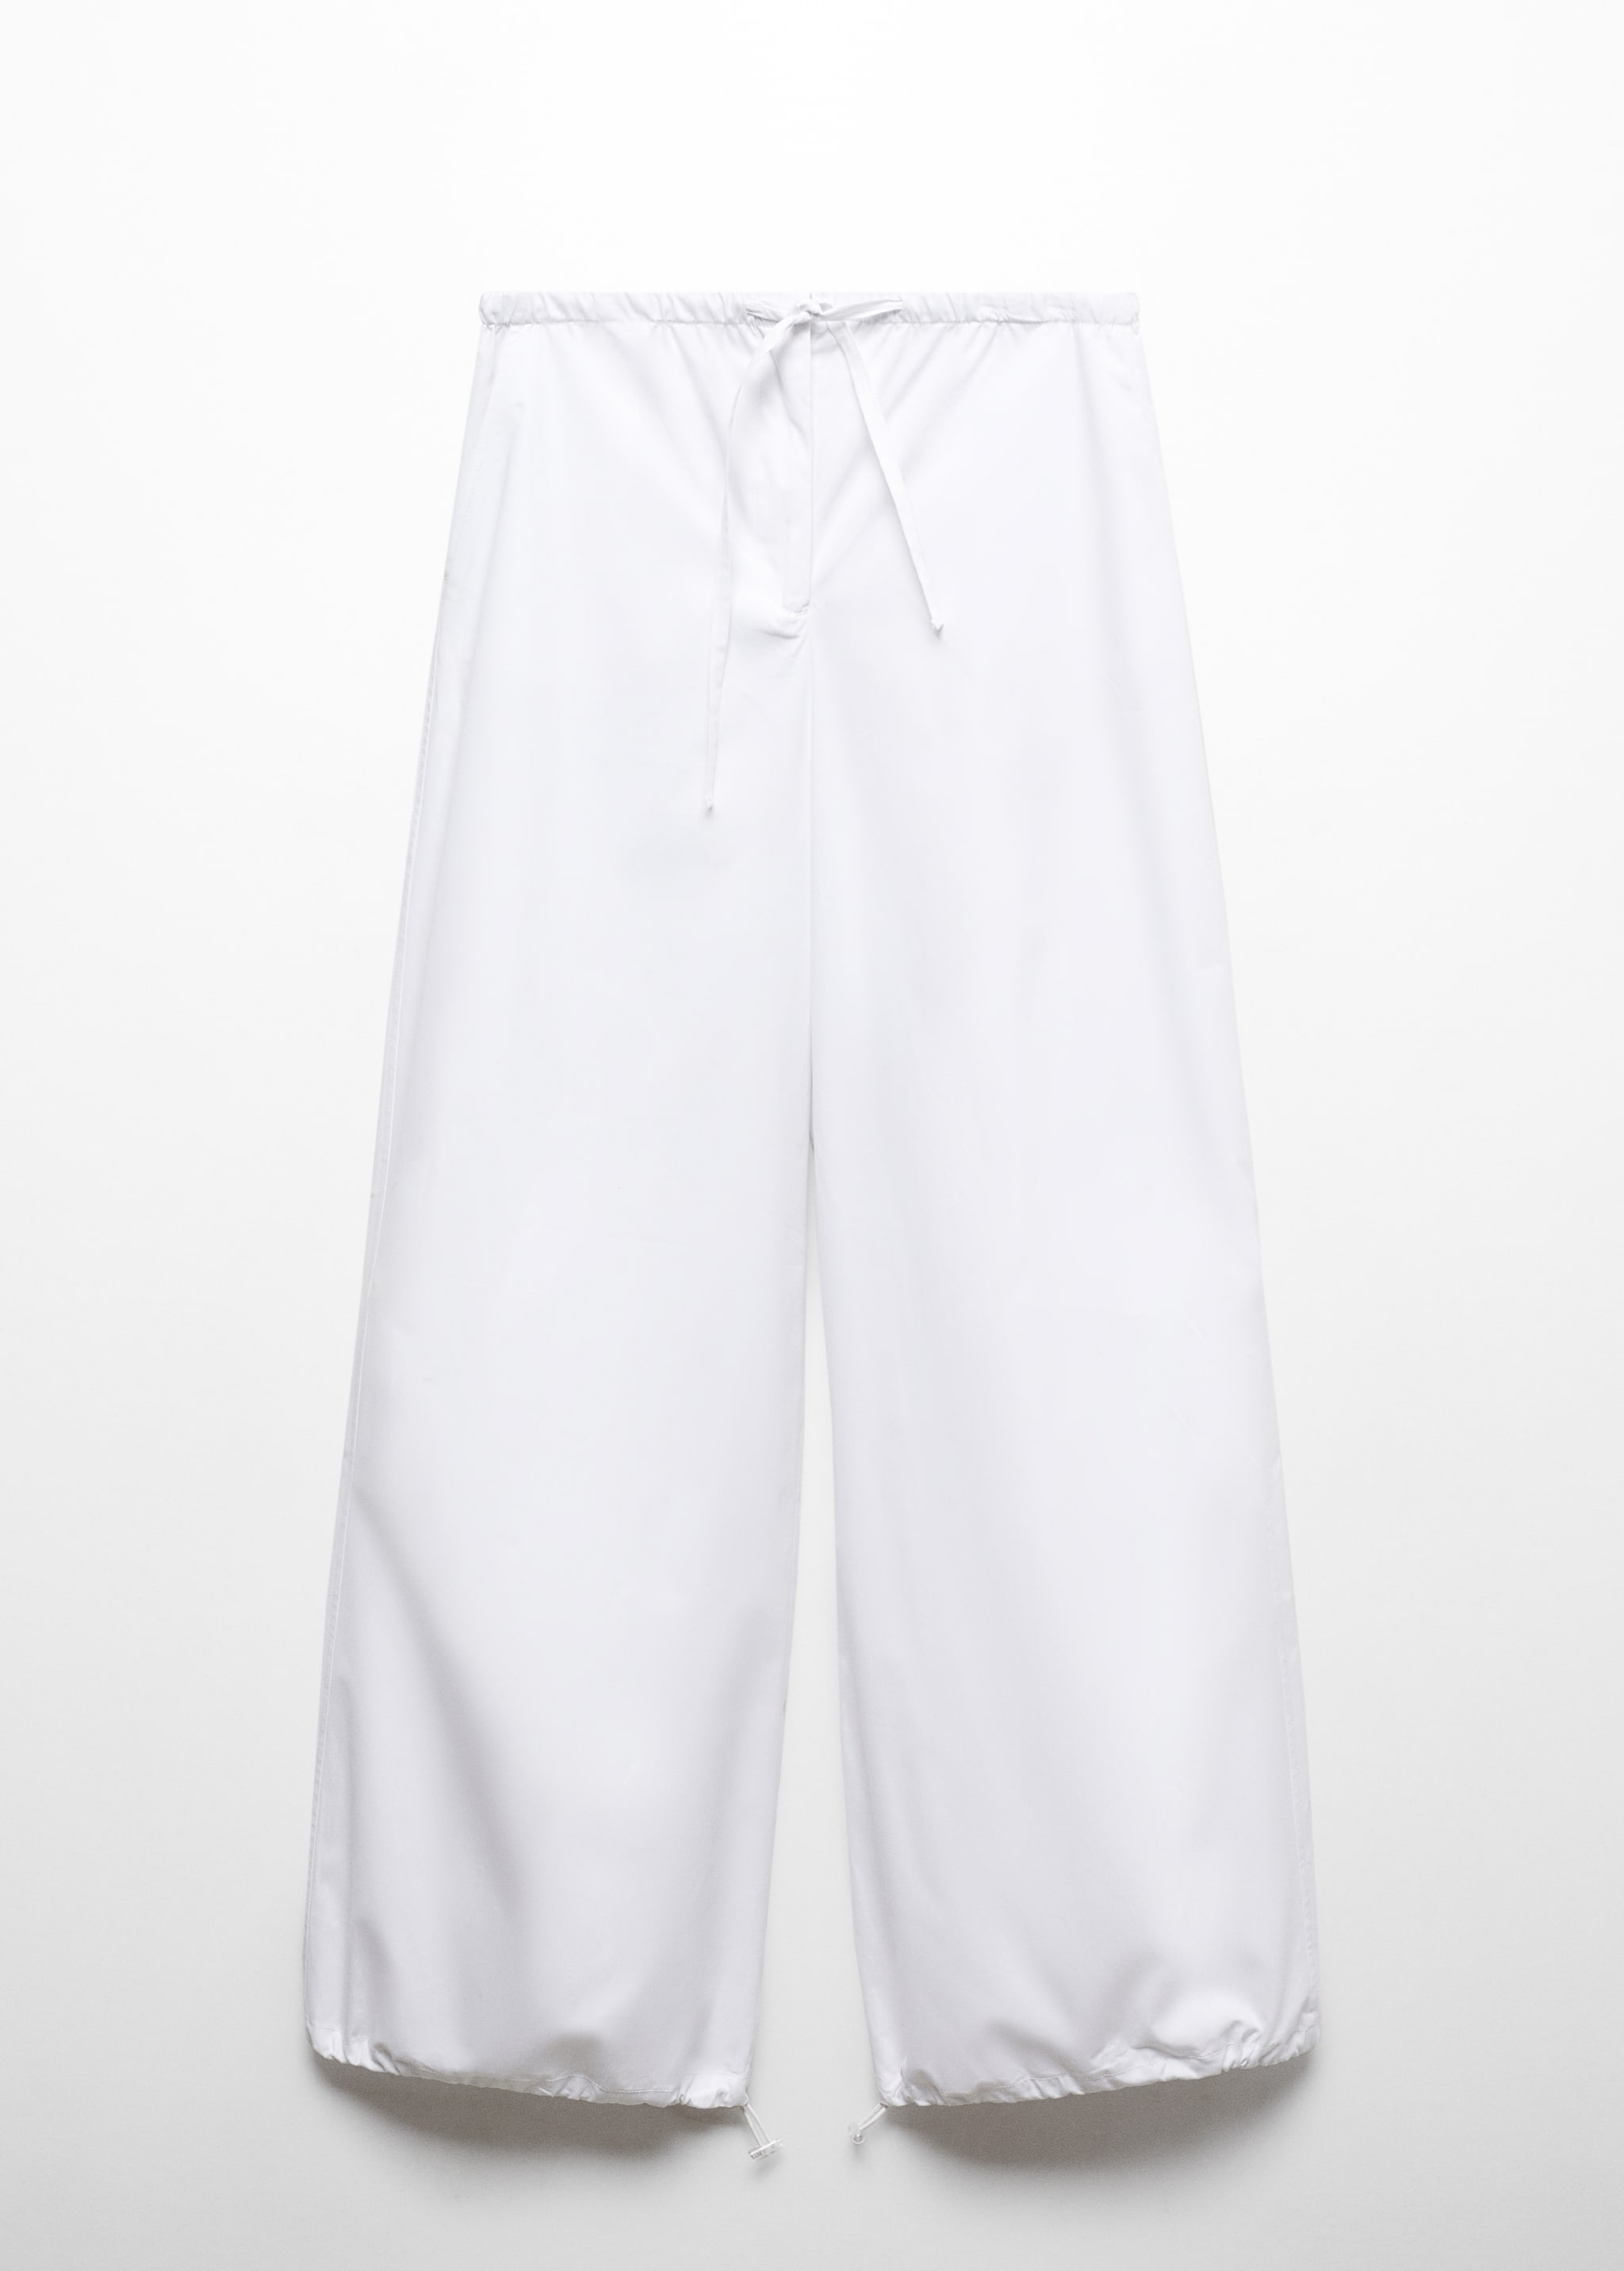 100% cotton parachute trousers - Article without model